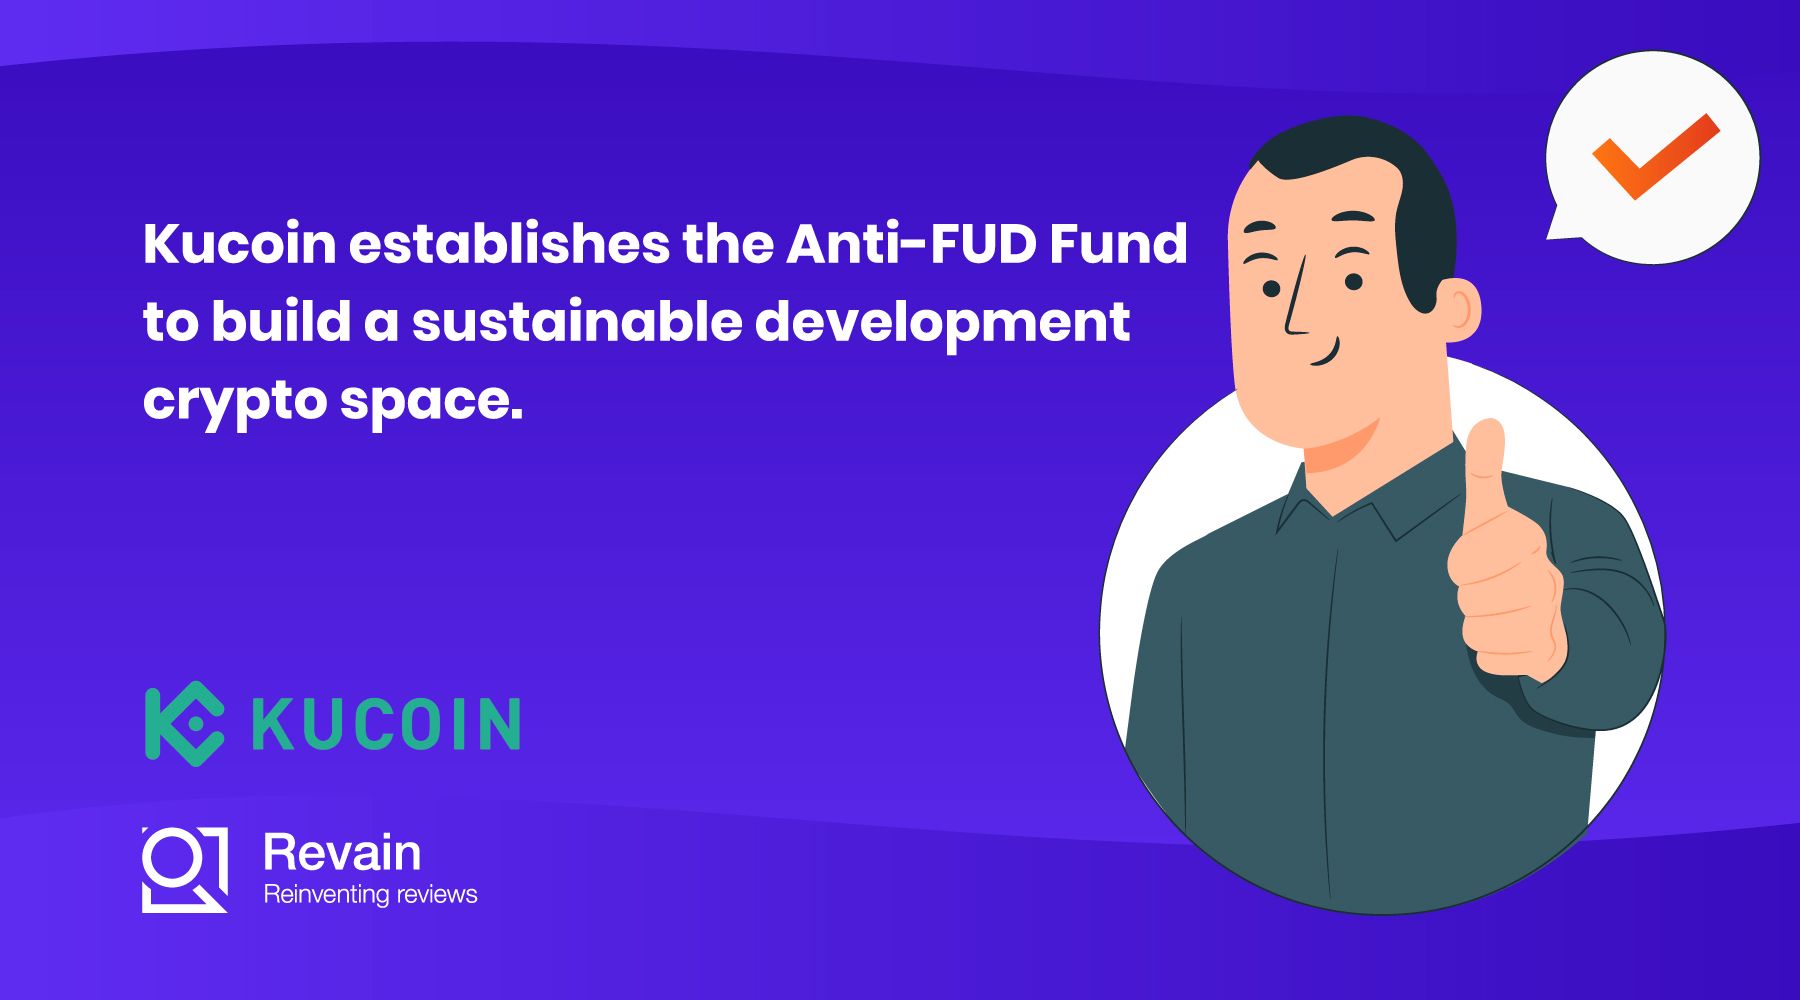 Kucoin establishes the Anti-FUD Fund to build a sustainable development crypto space.